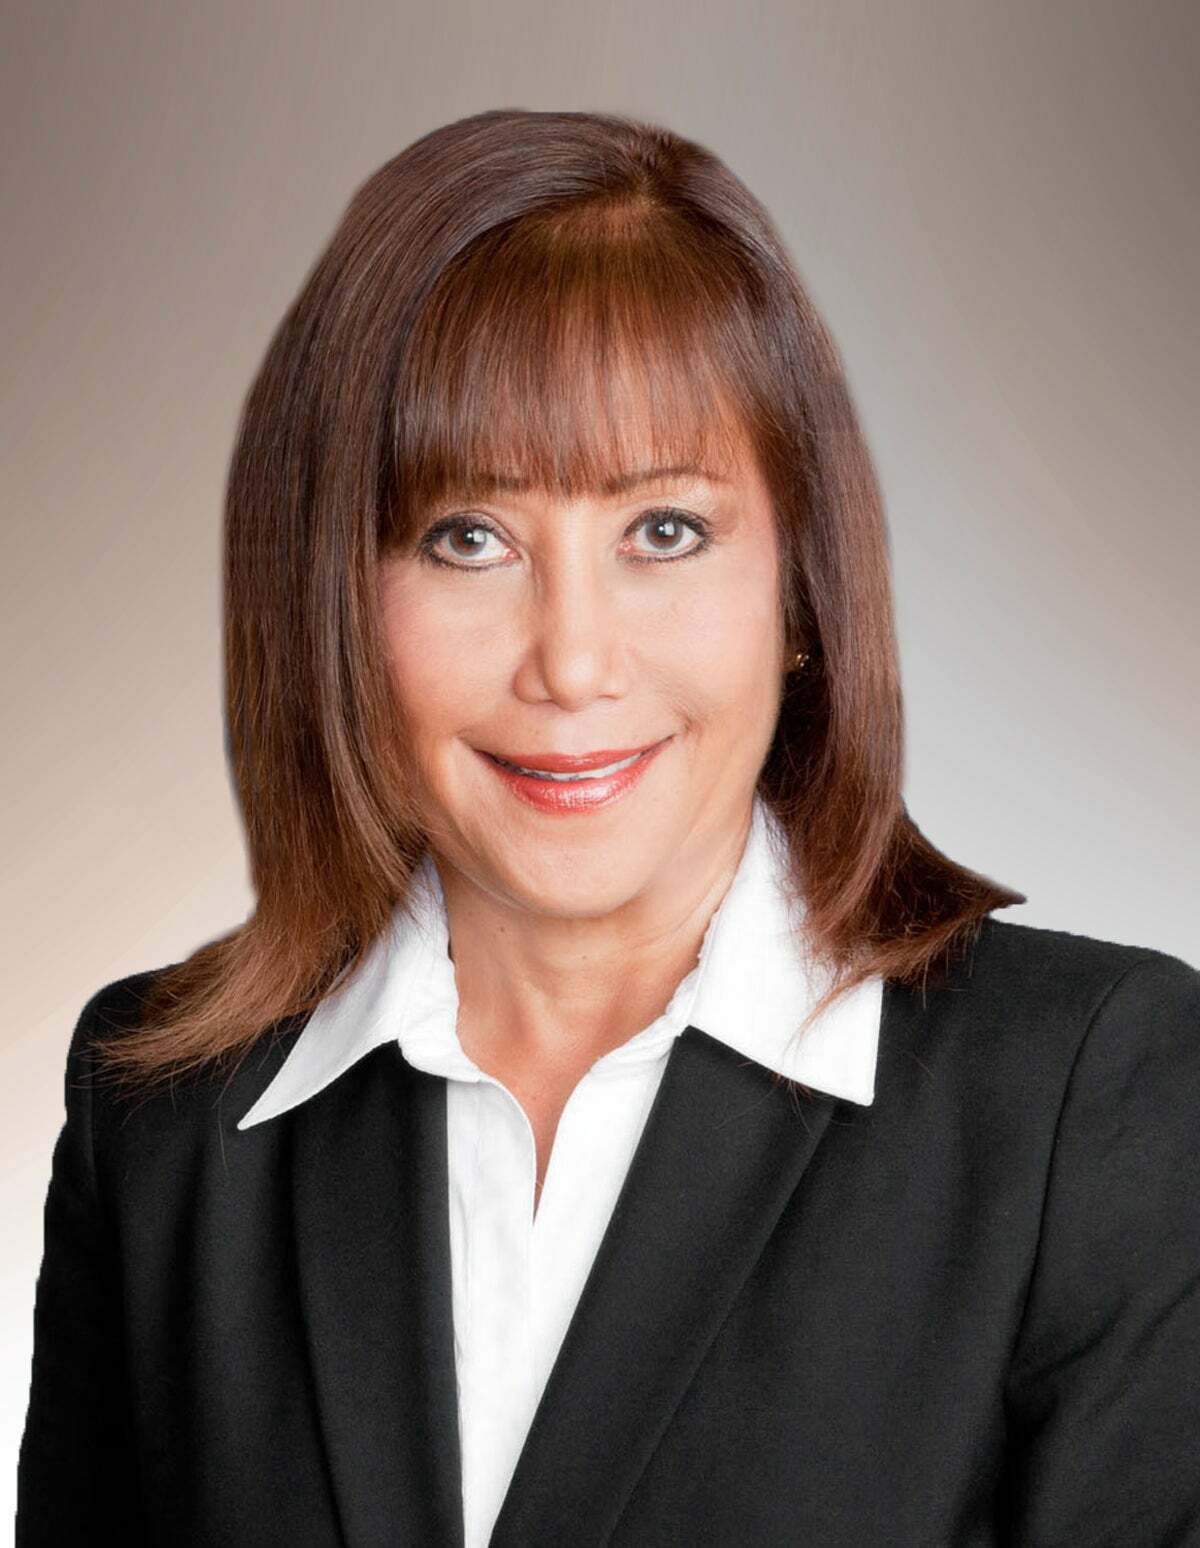 Margie Medalle (RA), Real Estate Salesperson in Kailua, Advantage Realty